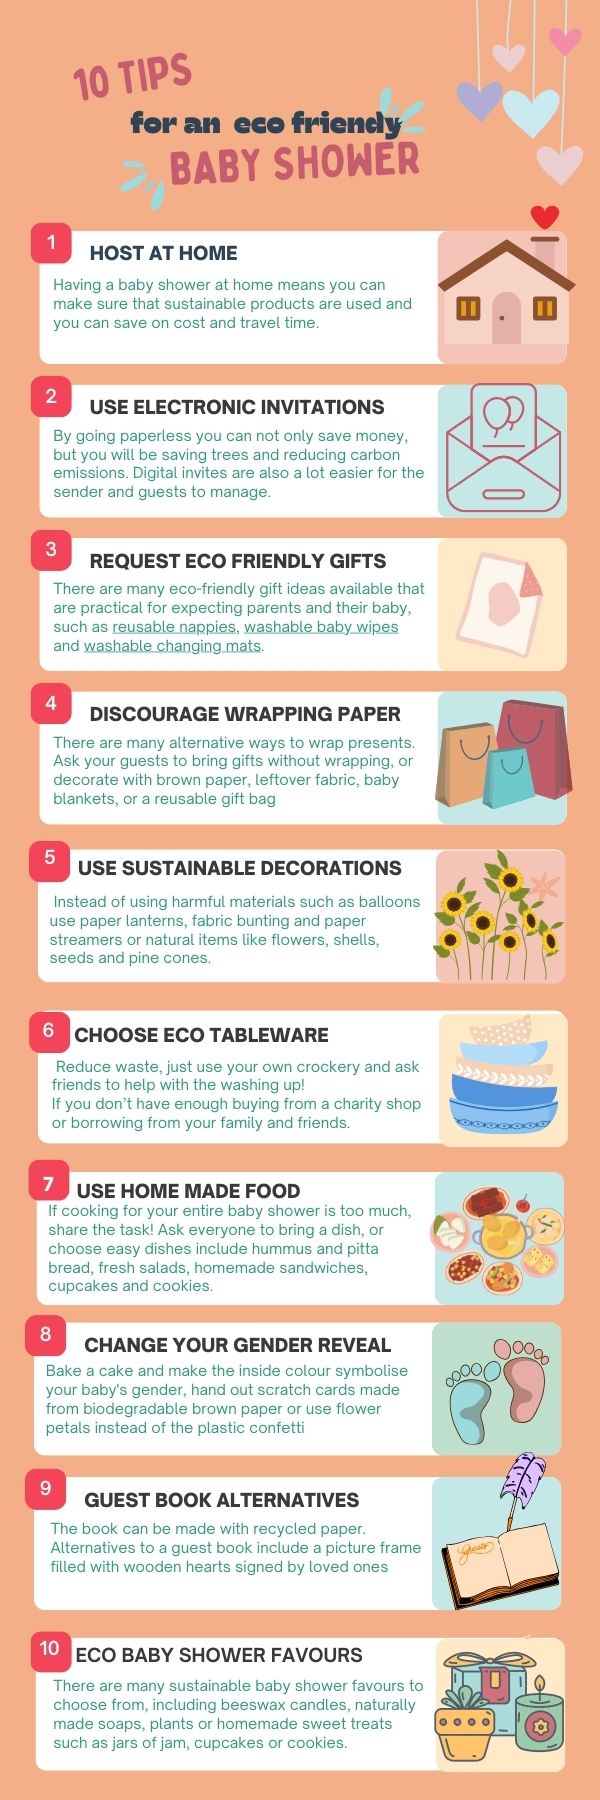 10-top-tips-on-how-to-throw-an-eco-friendly-baby-shower-infographic